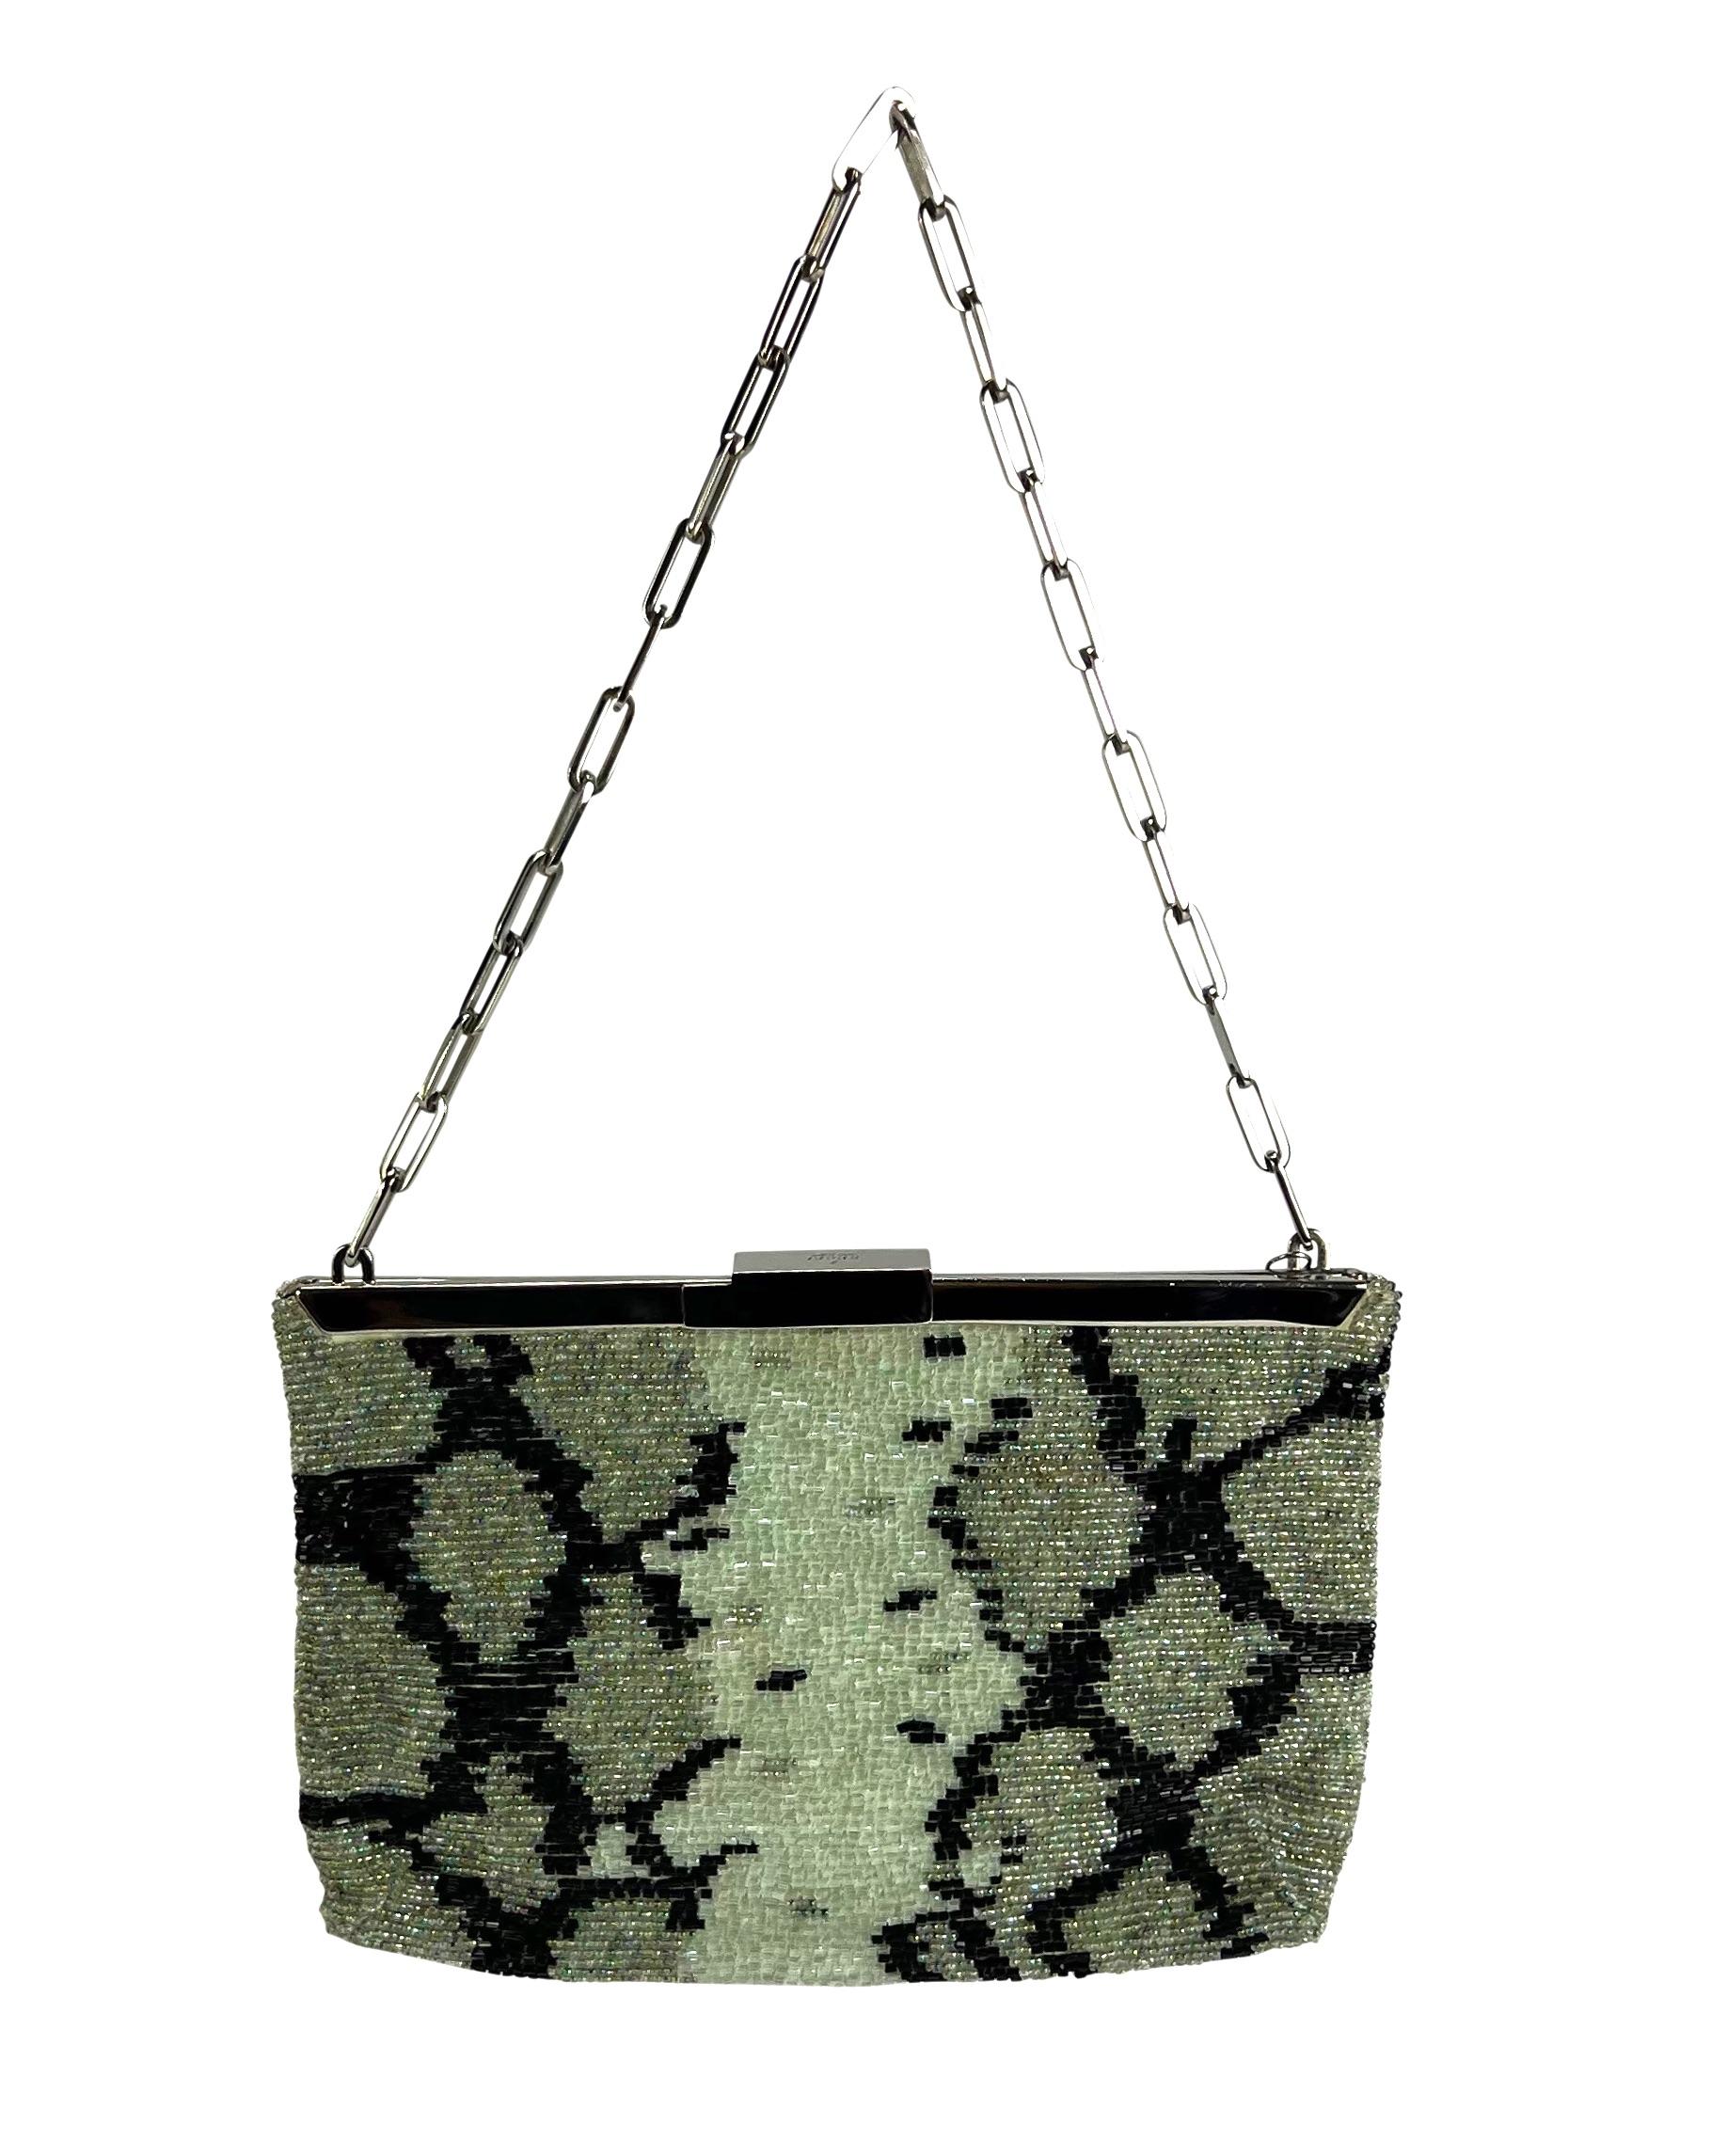 S/S 2000 Gucci by Tom Ford Green Beaded Snake Skin Print Chain Bag For ...